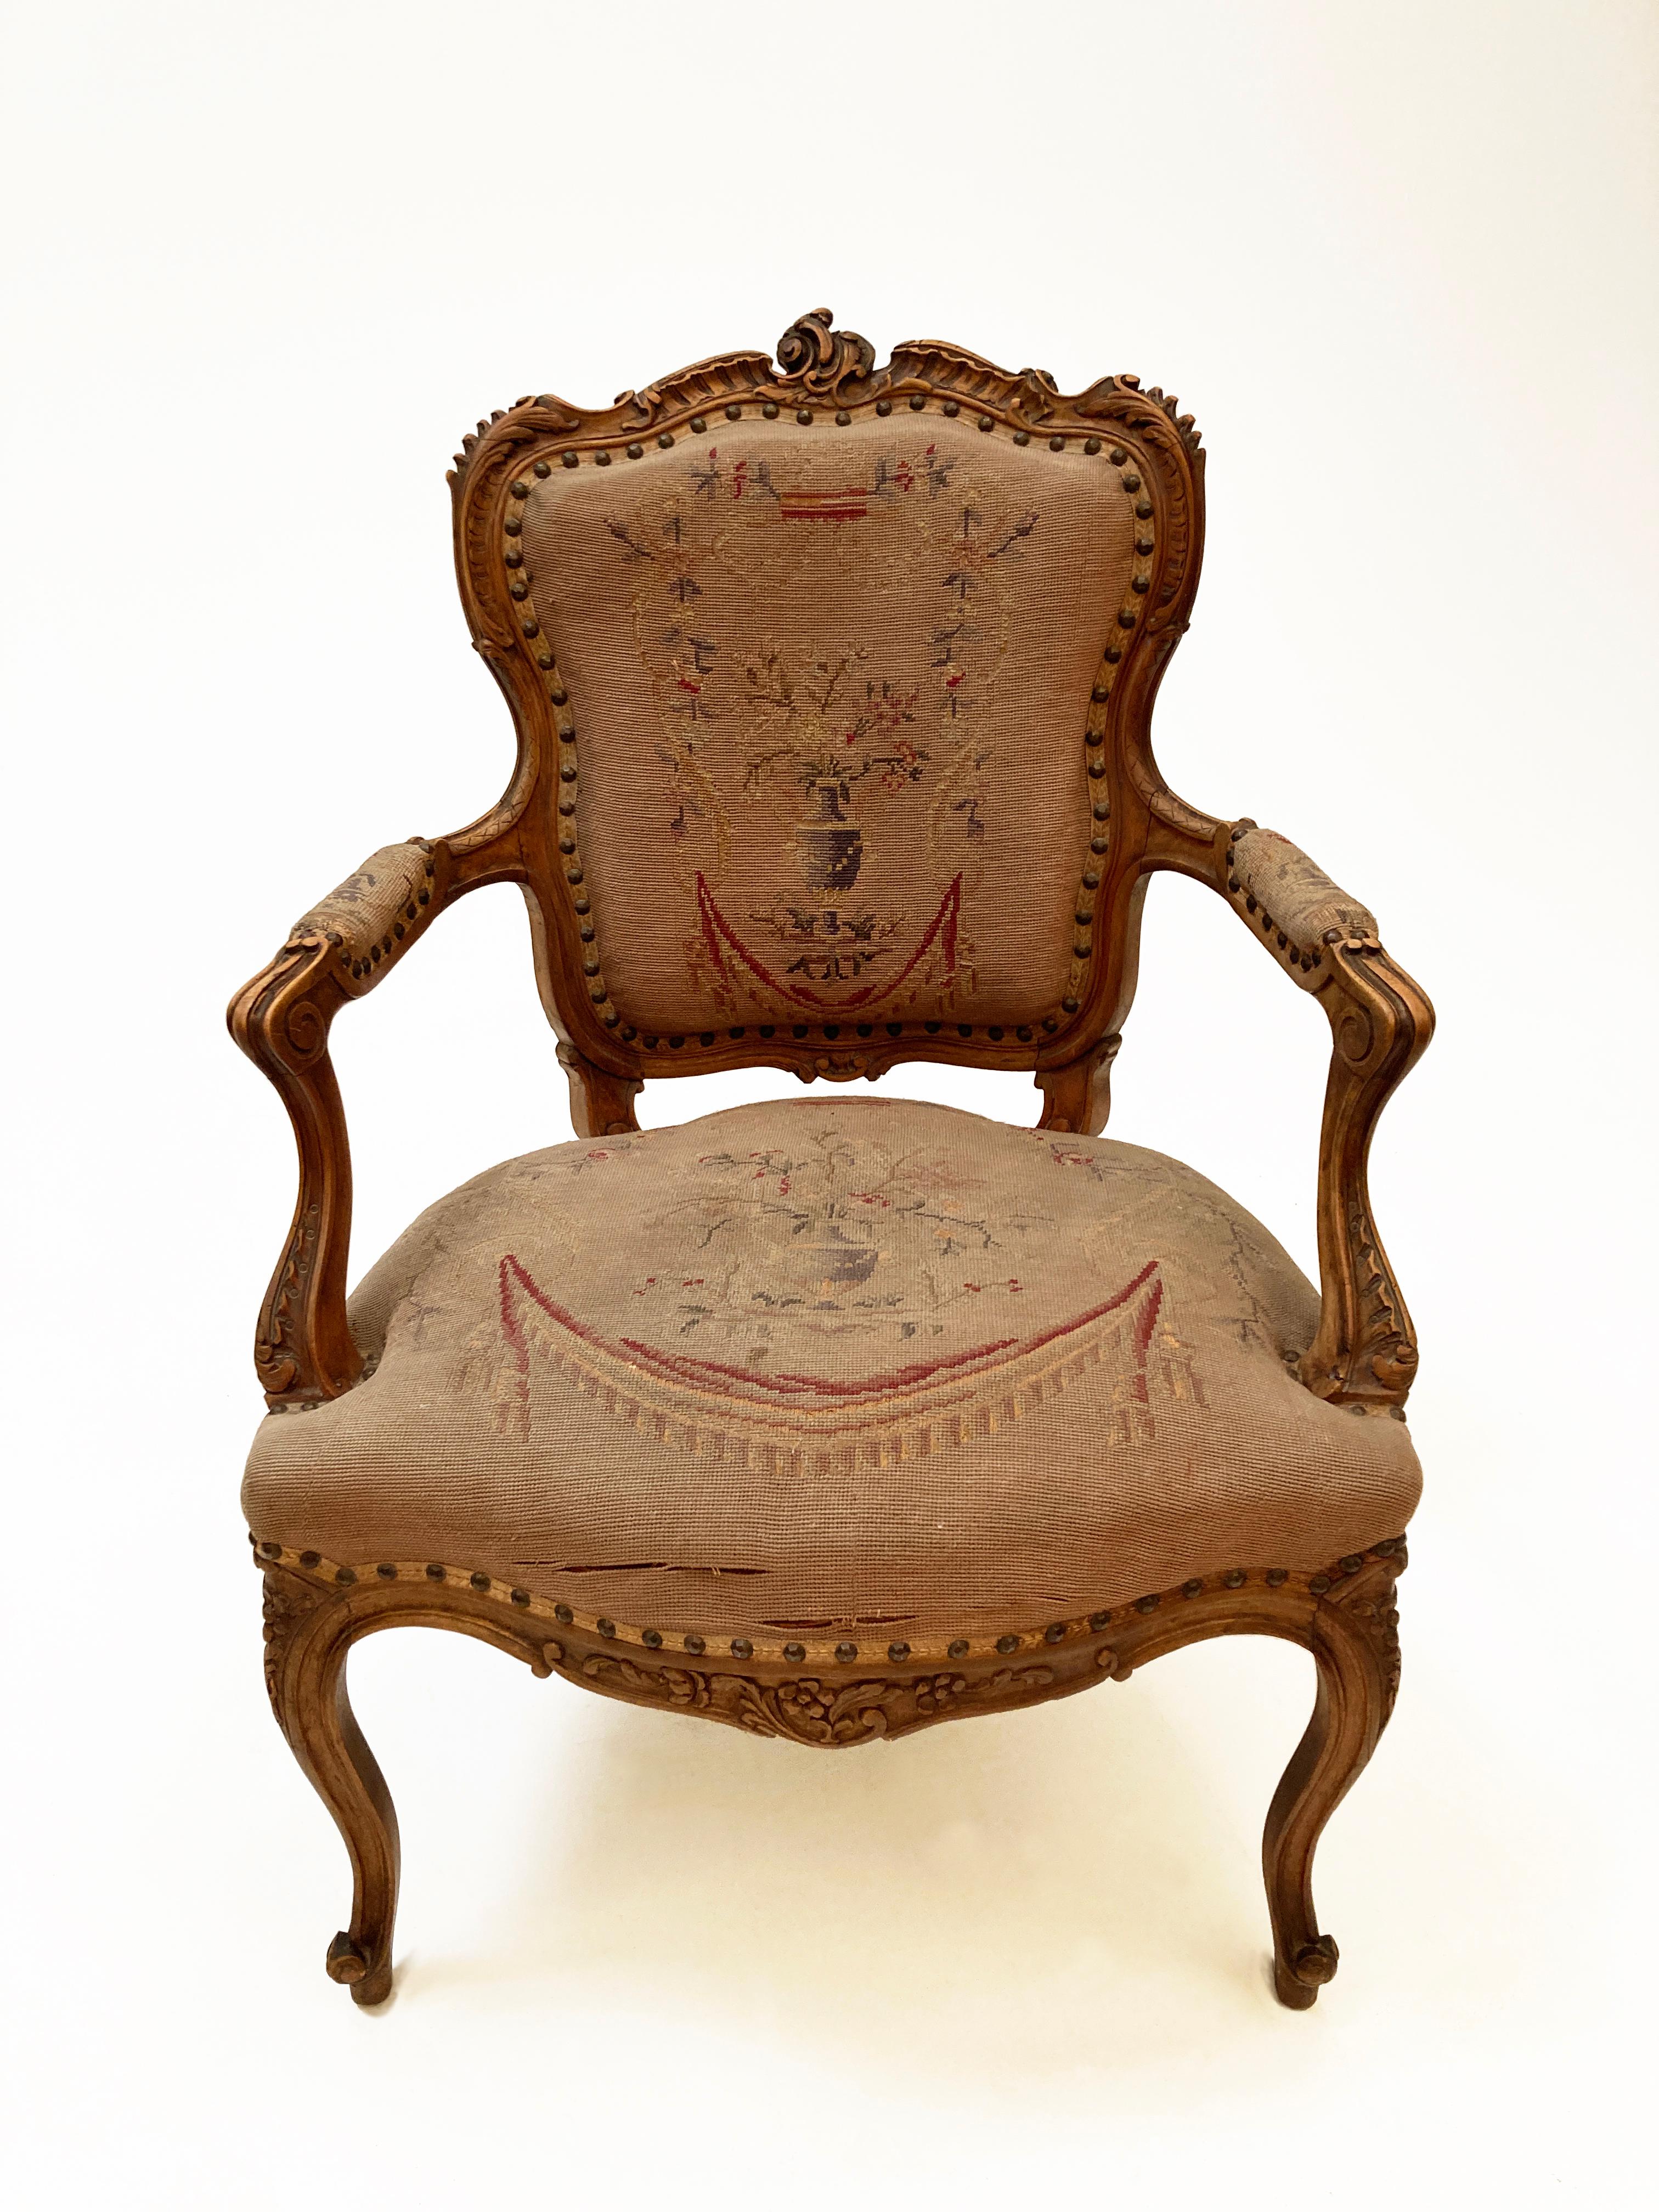 This mid 18th century French Louis XV walnut fauteuil with seemingly gloriously original upholstery portrays an exquisite petit-point that shows beautiful aging and a few minor areas that are reparable. The chair frame encompassing the padded back,